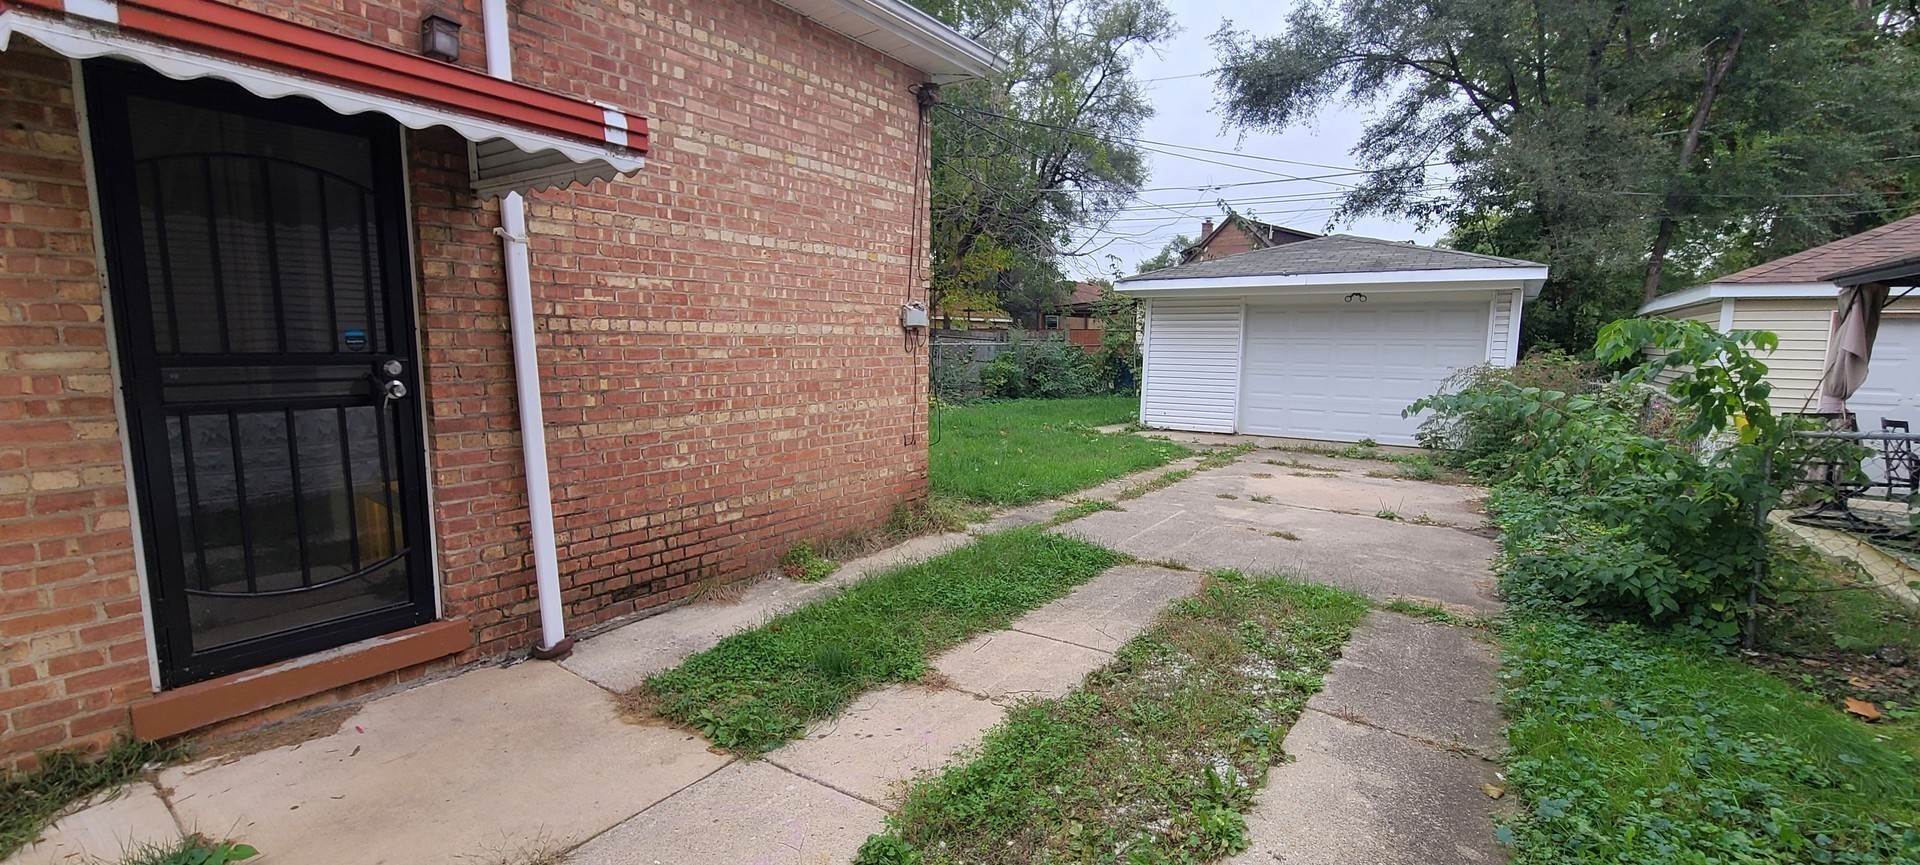 8. Single Family for Sale at West Pullman, Chicago, IL 60628